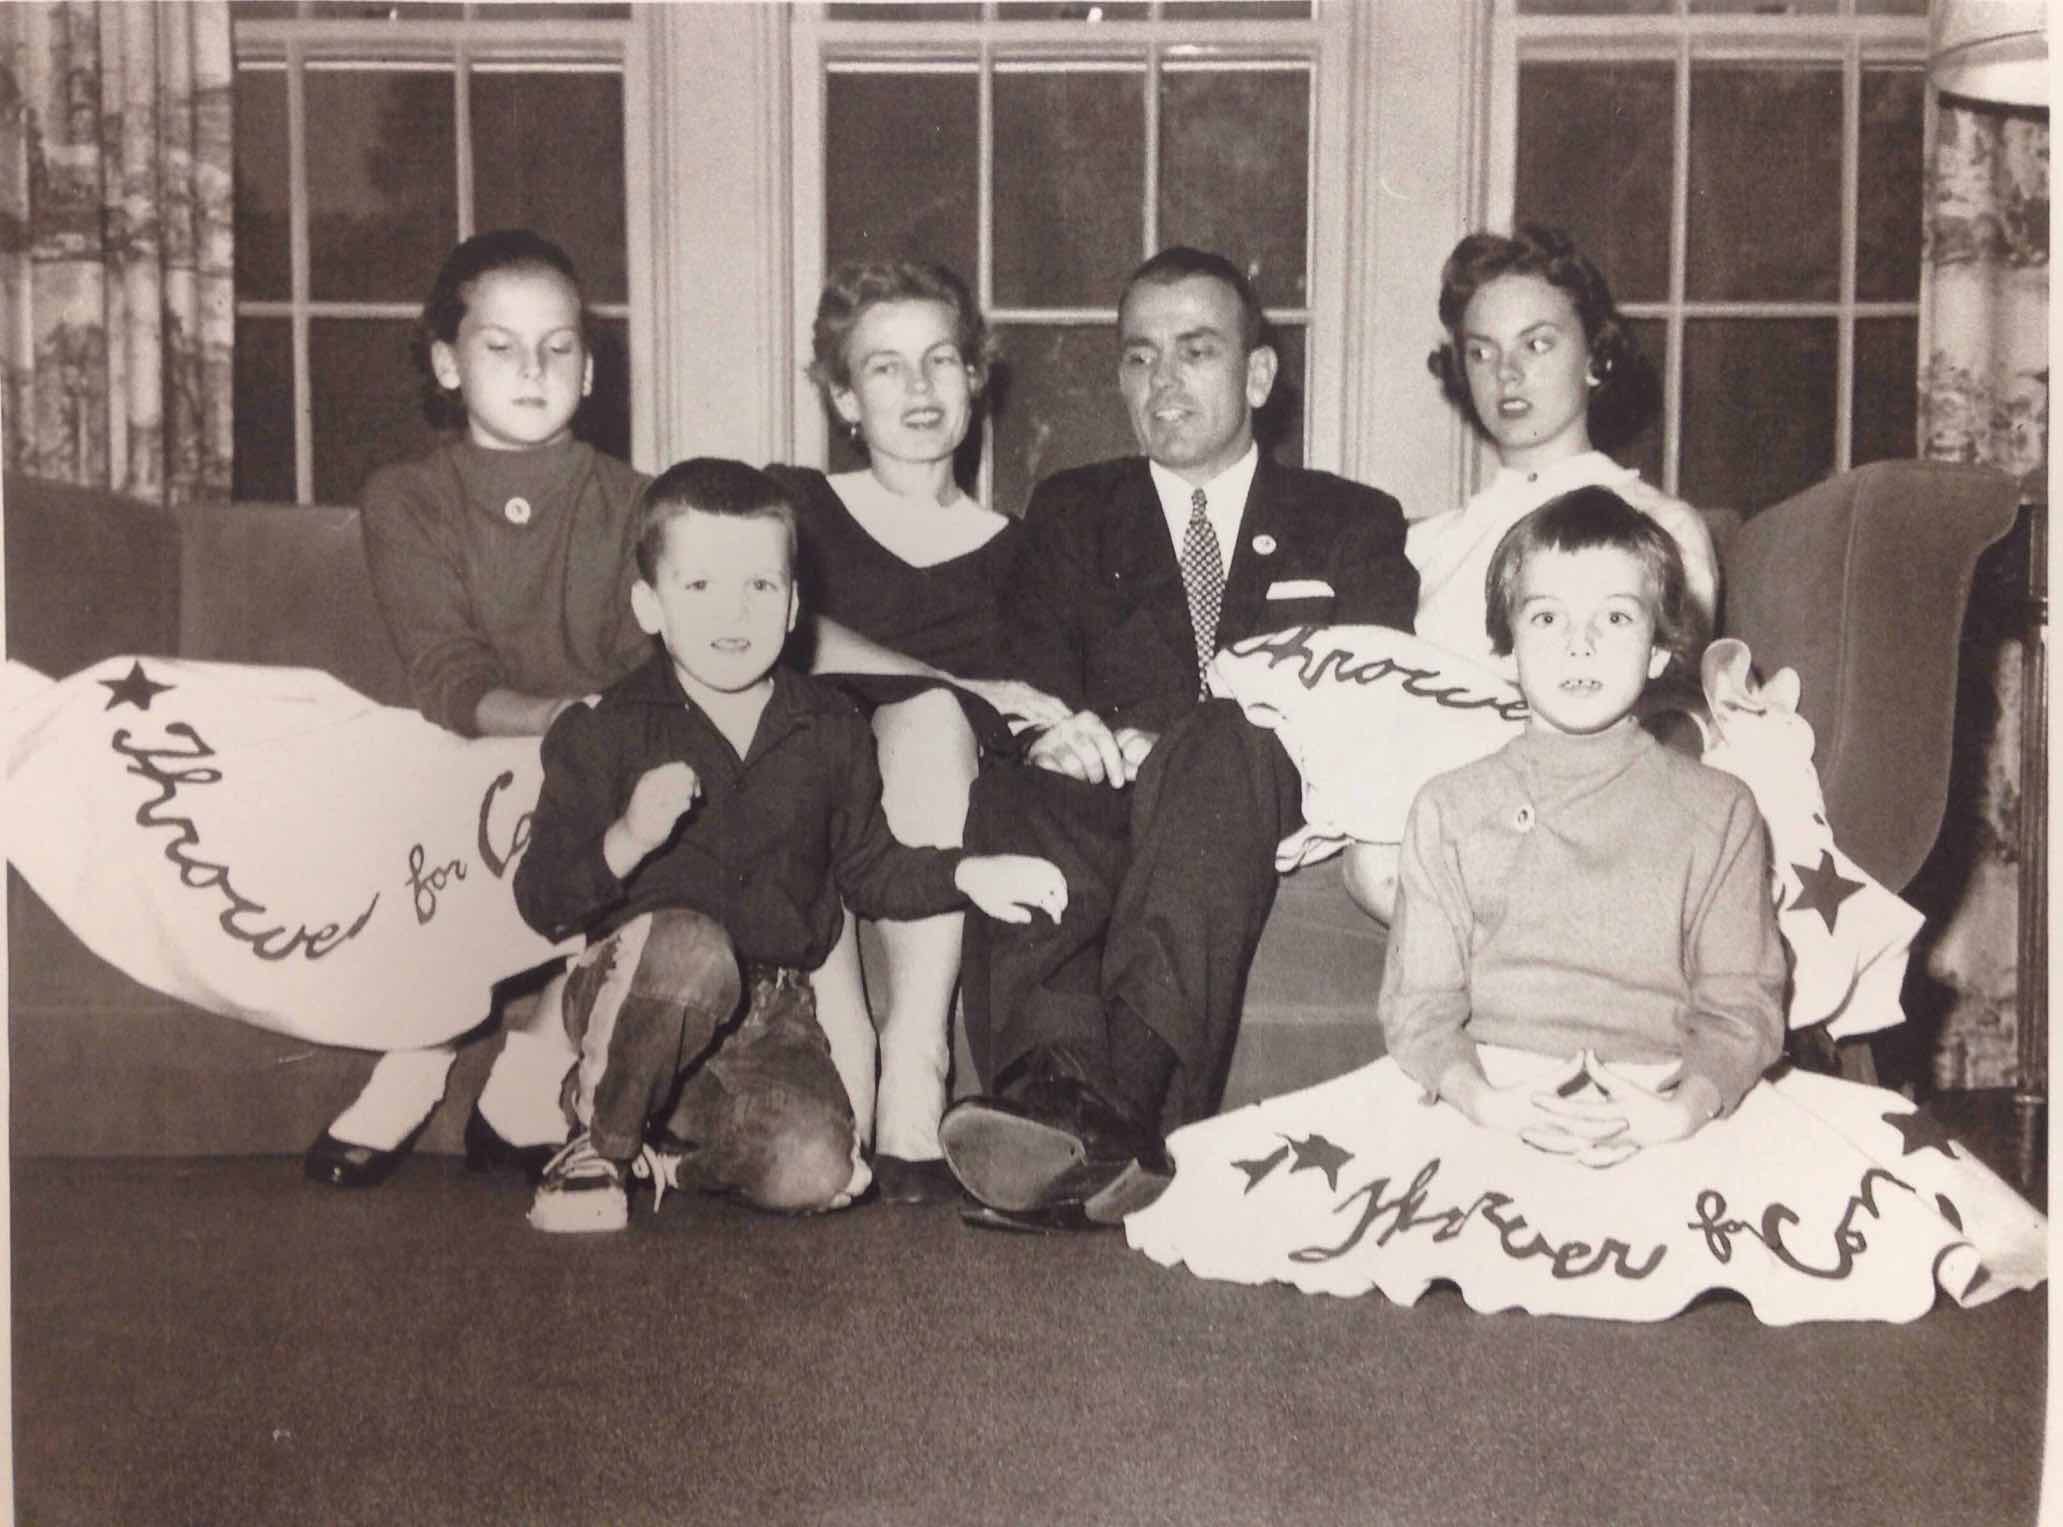 Thrower For Congress Skirts, Randolph Thrower and his family, 1956